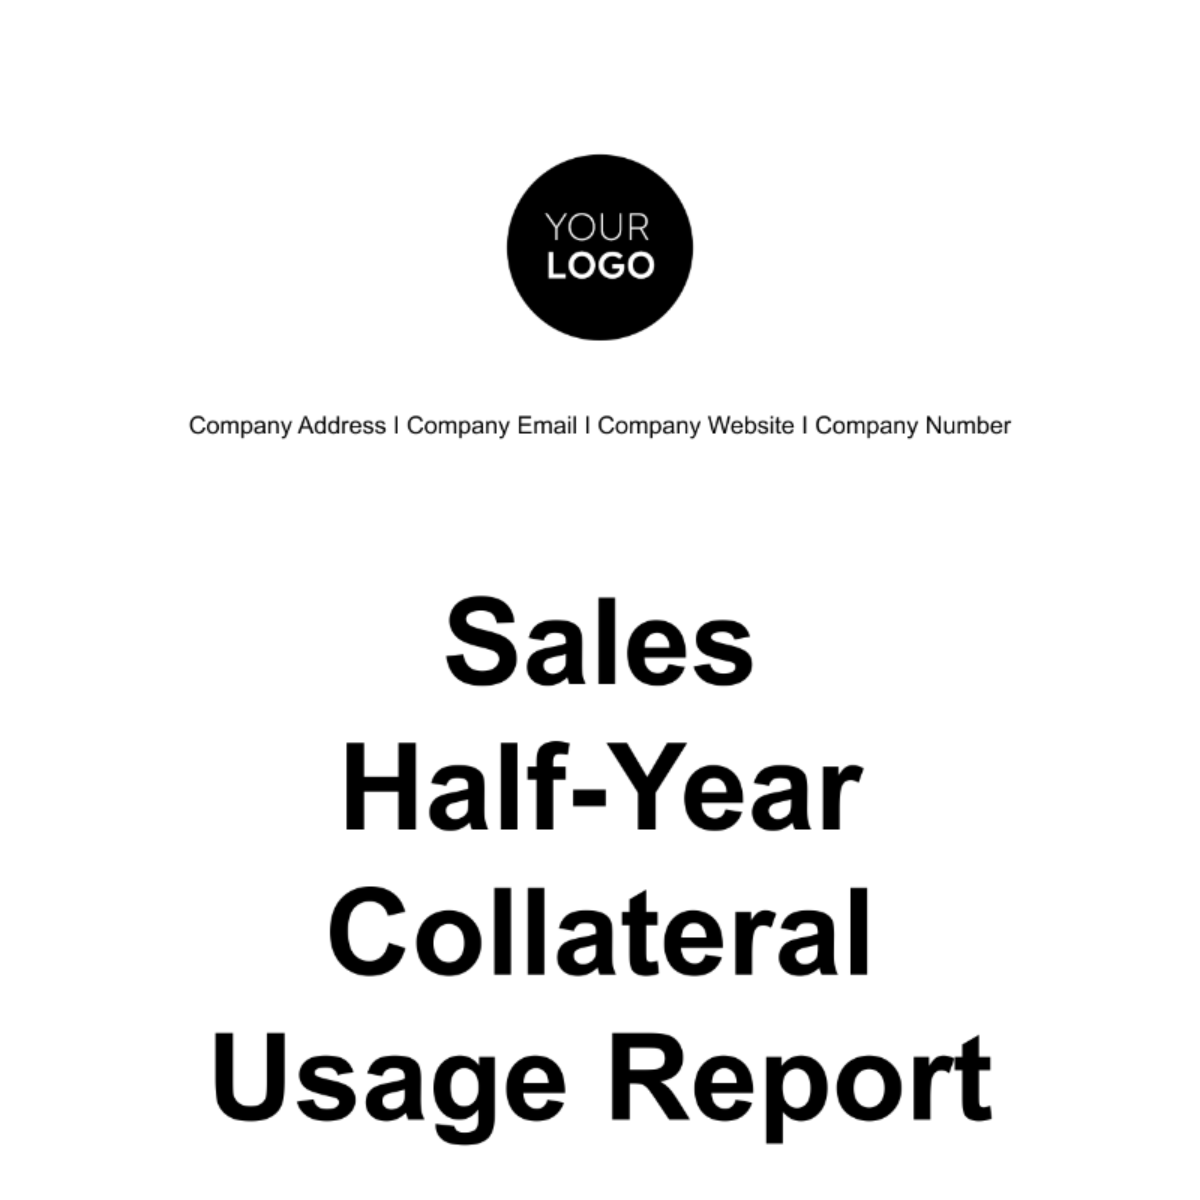 Sales Half-Year Collateral Usage Report Template